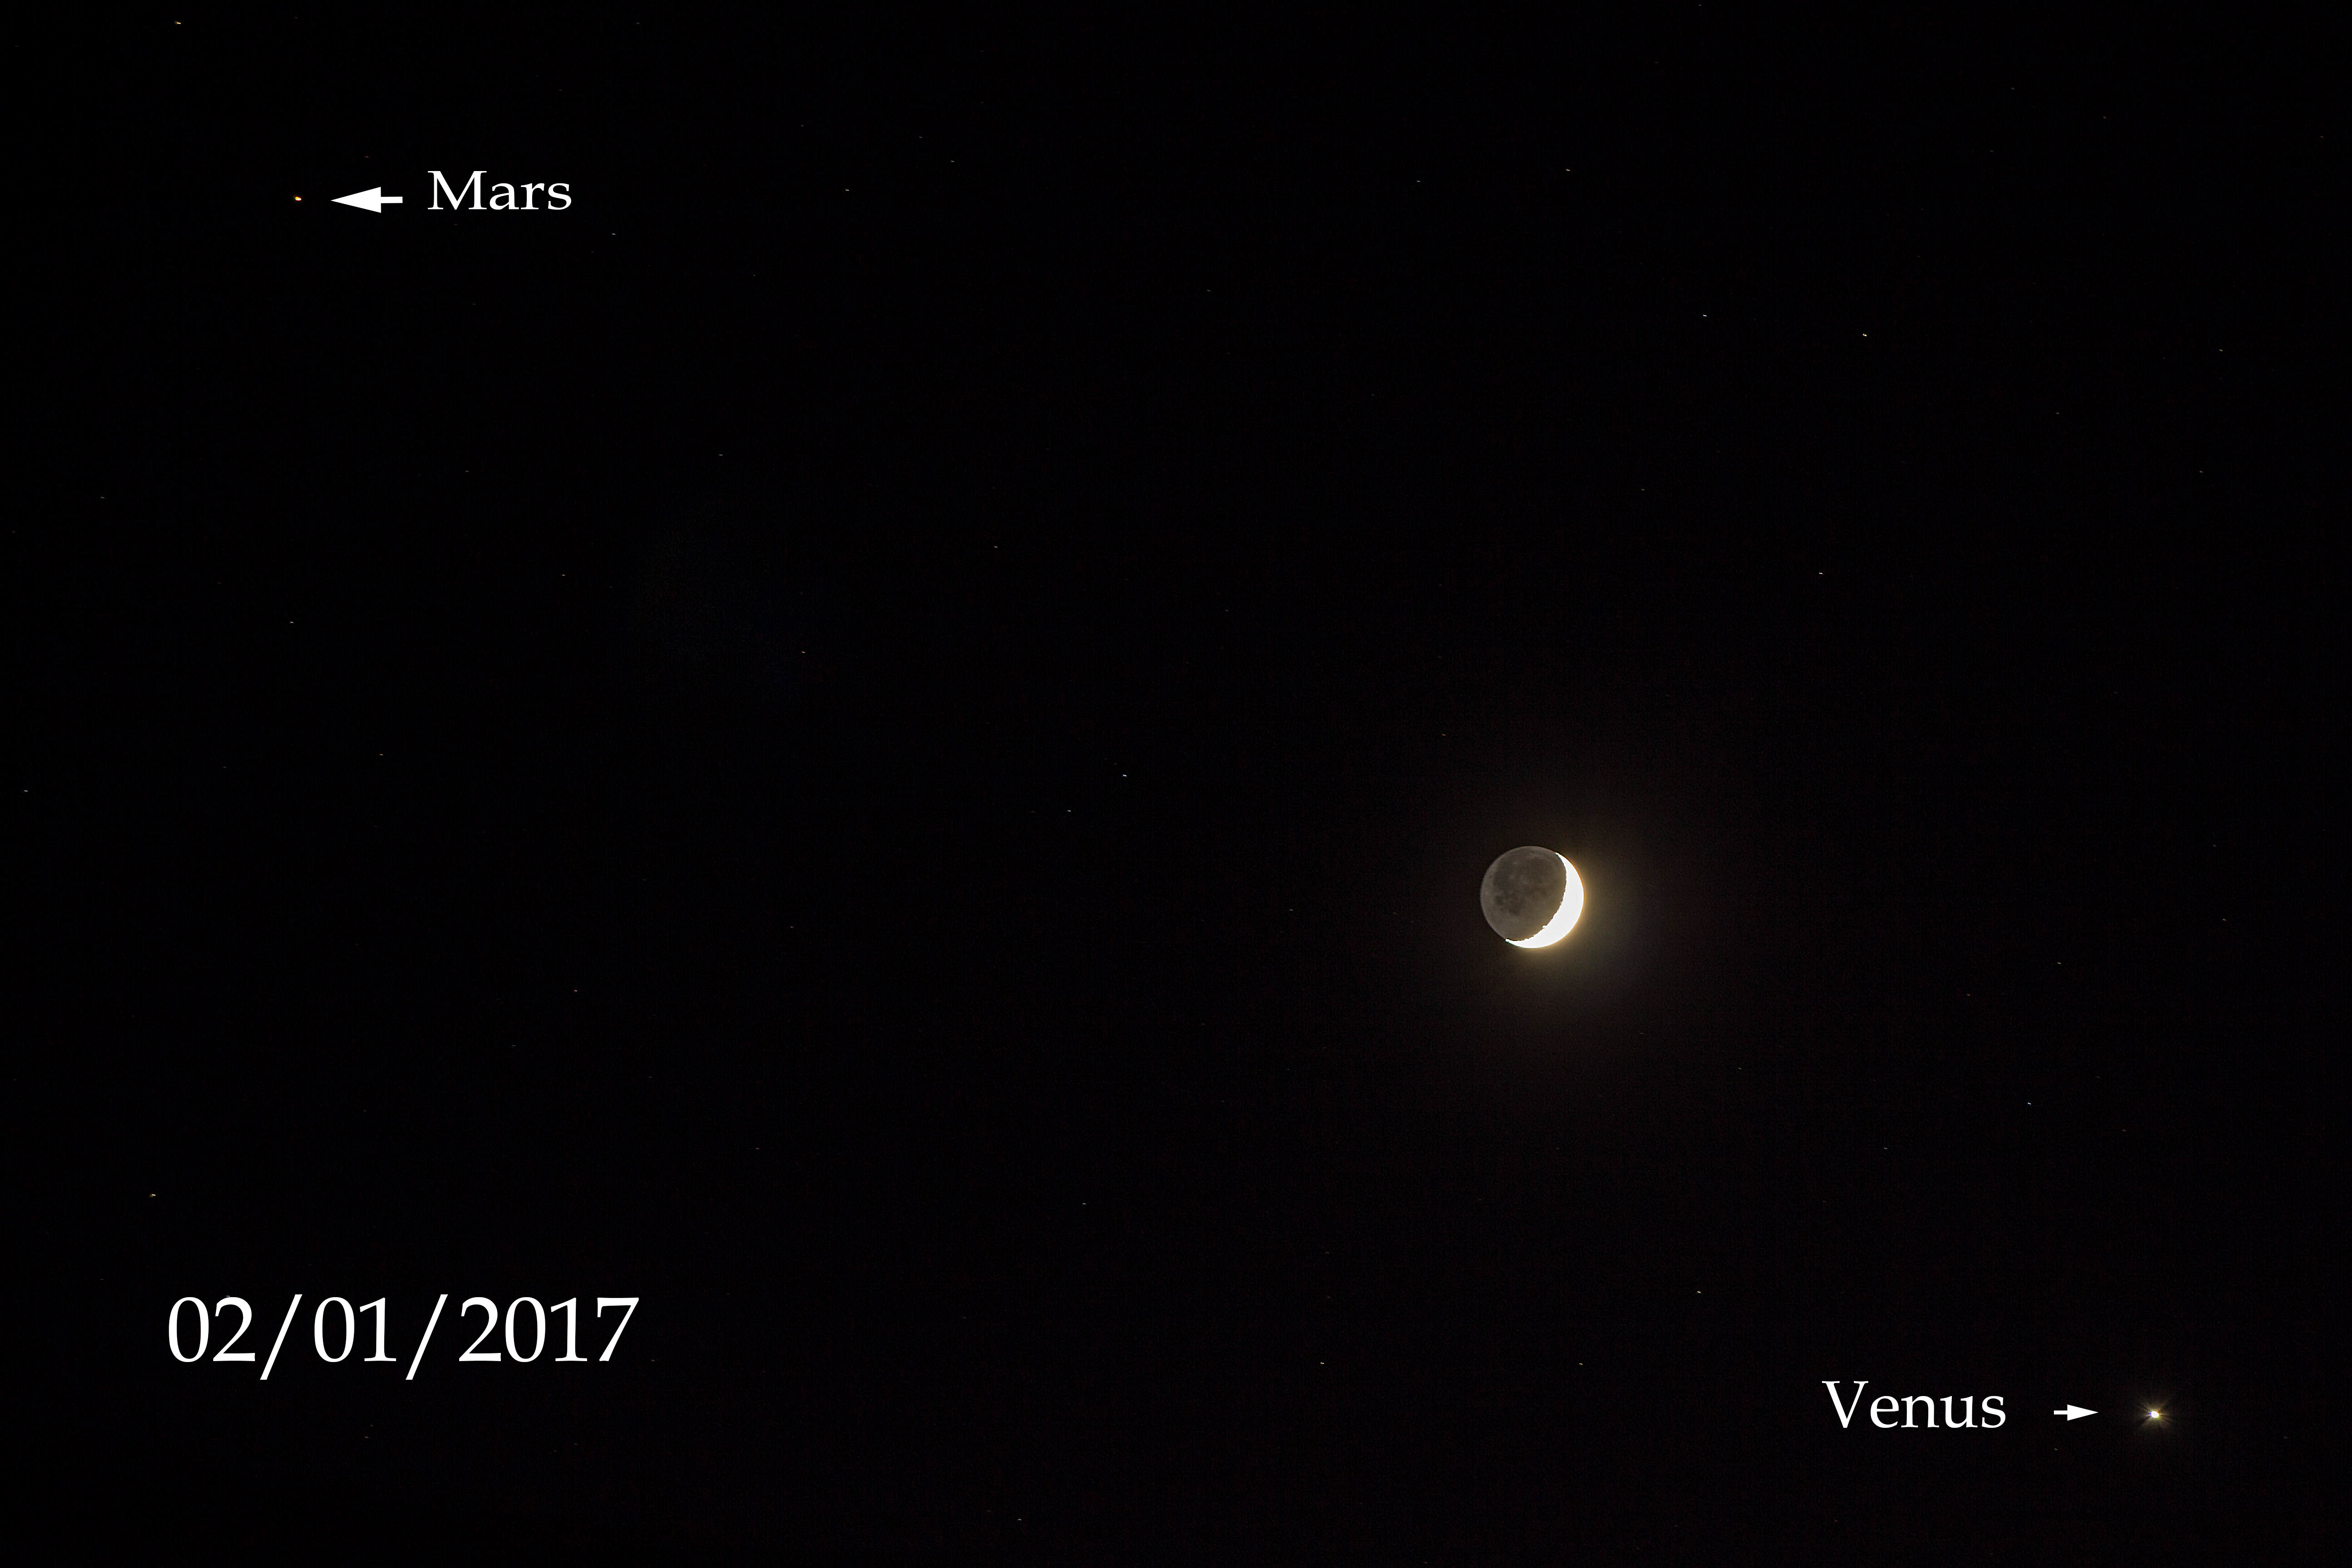 Conjunction of Moon, Venus and Mars by Andy Heenan. 2nd January 2017. Canon EOS 600D f/4.5, 4 seconds at ISO-100